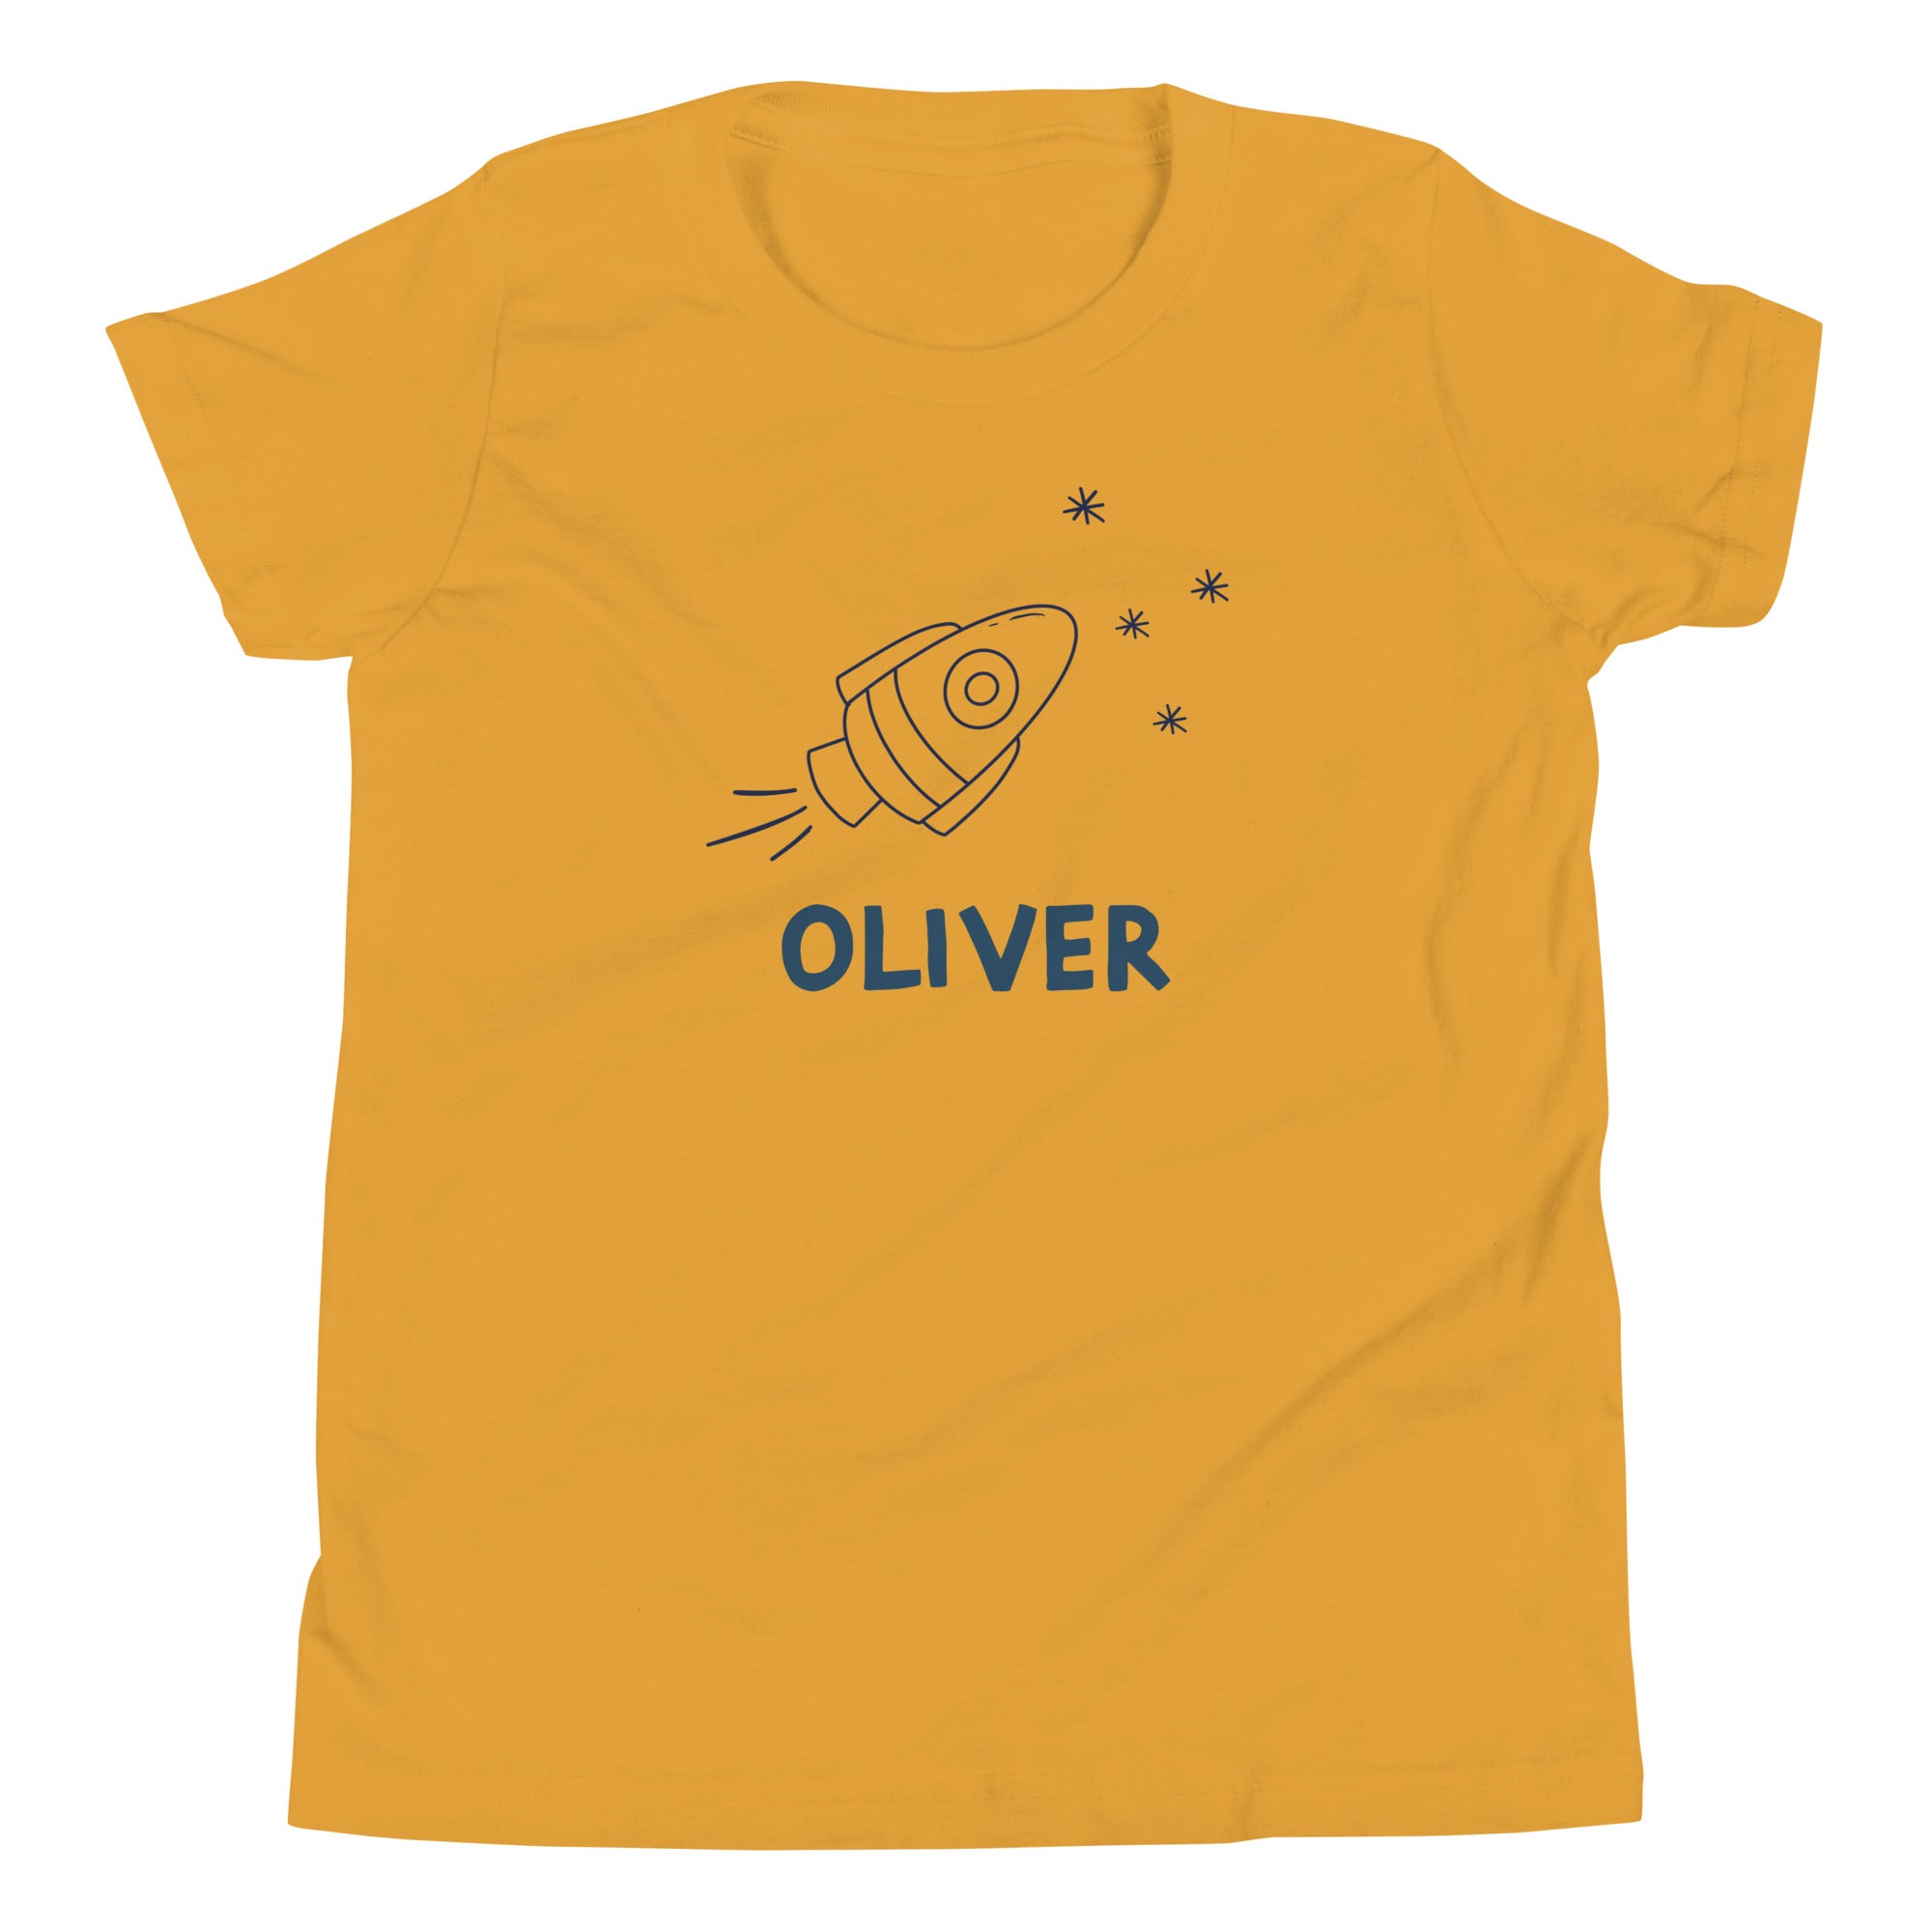 mustard yellow kids personalized shirt with a rocket ship design